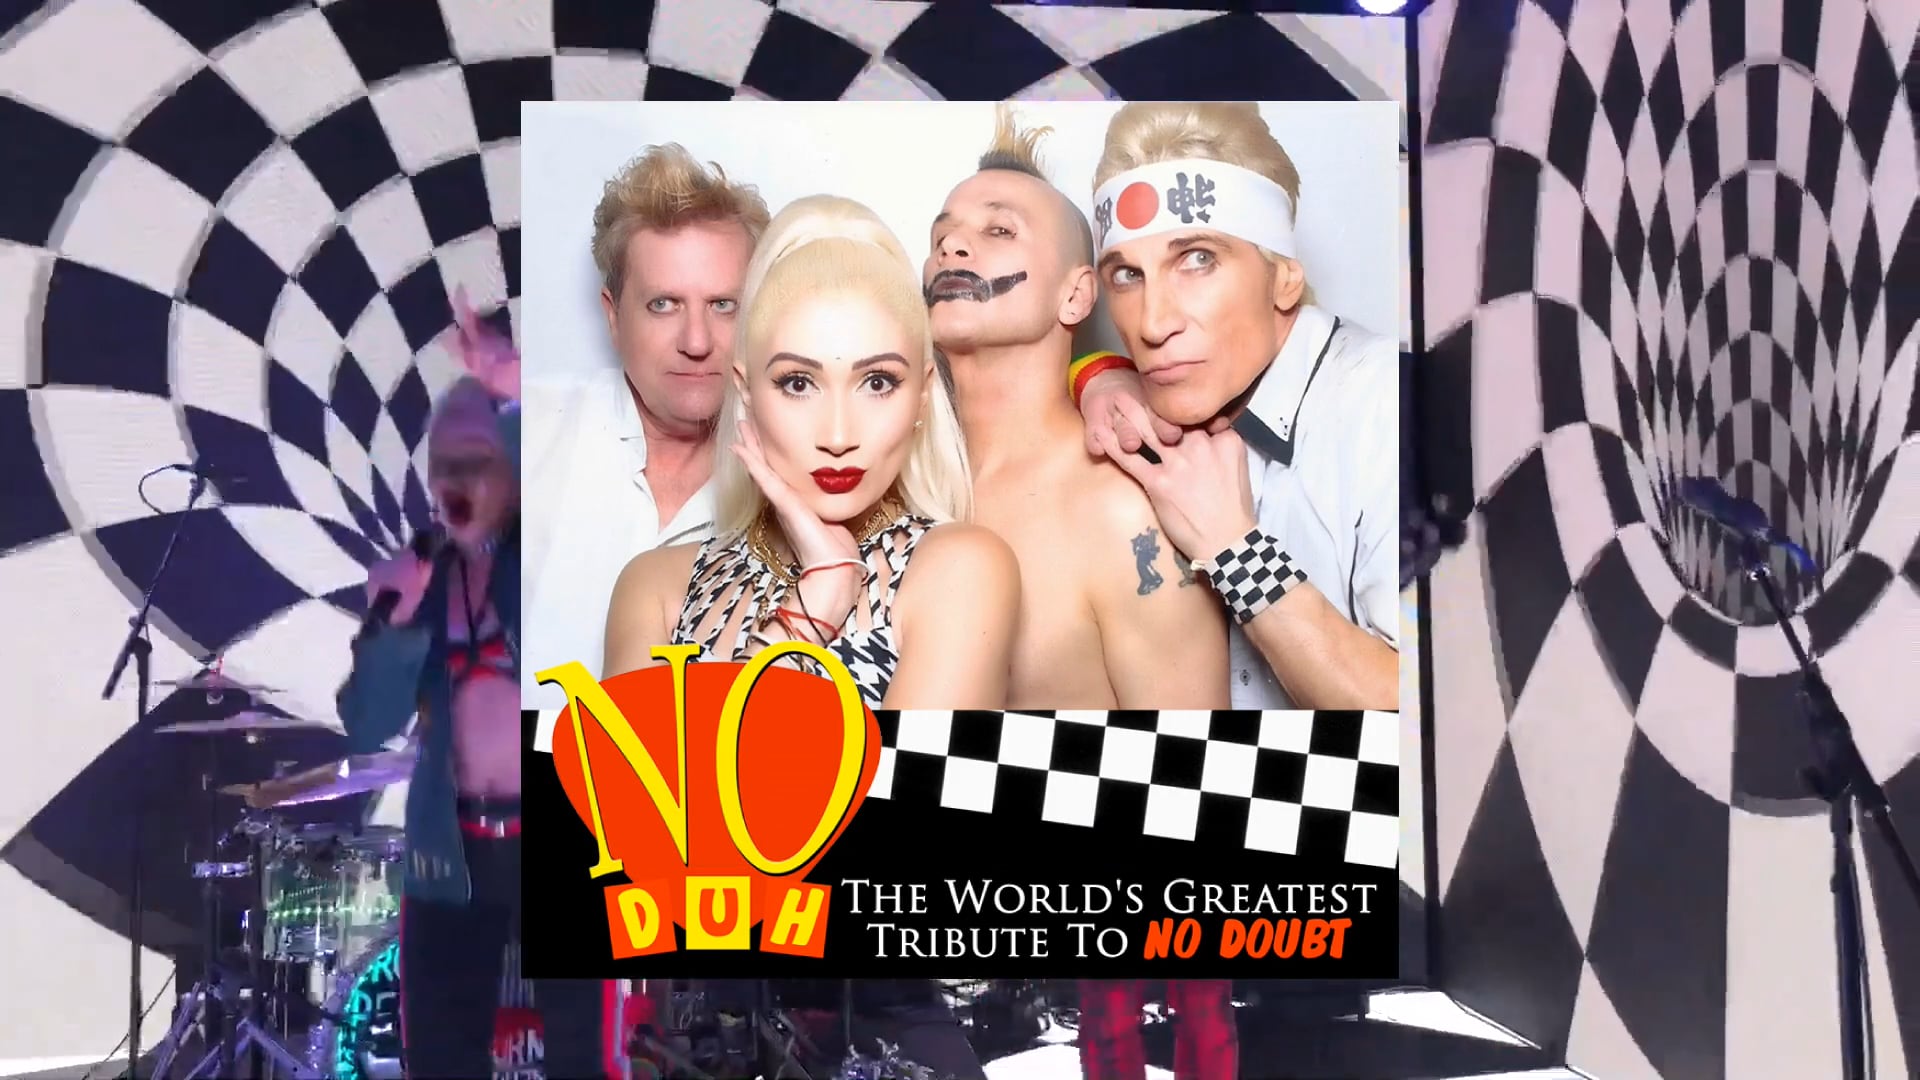 No Doubt tribute, NO DUH, officially the World's greatest tribute to No Doubt & Gwen Stefani!